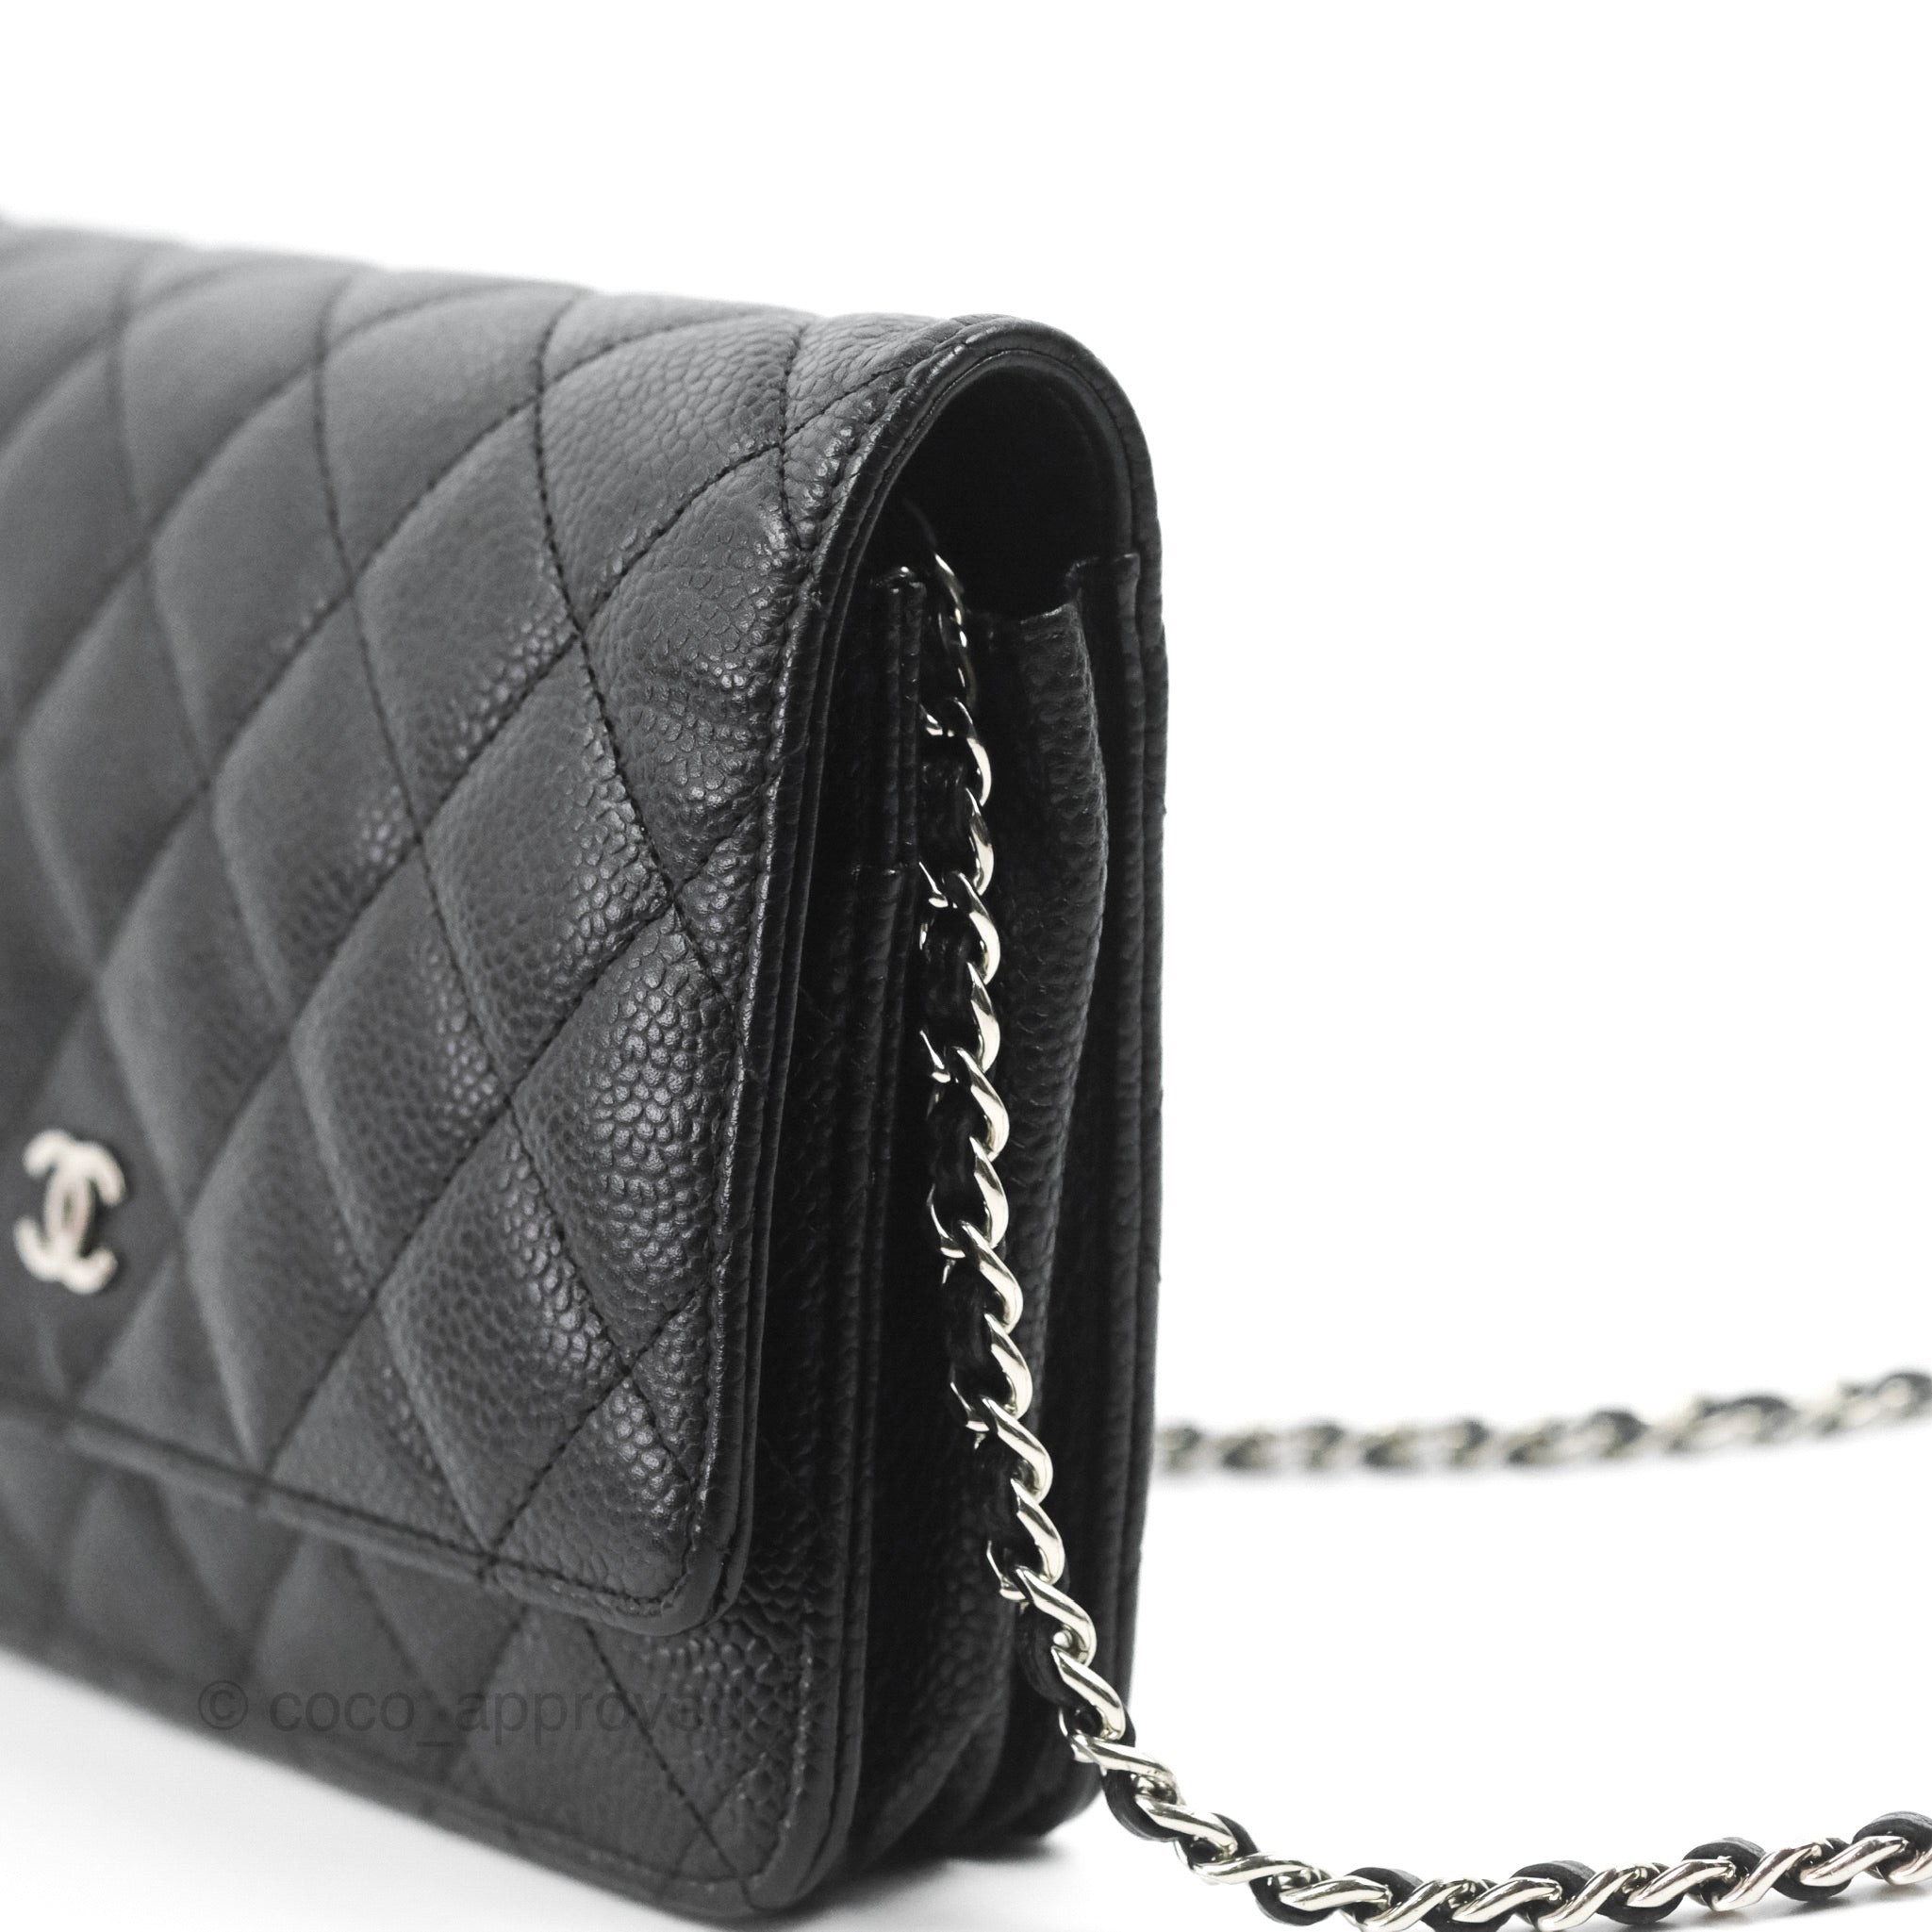 wallet on chain chanel price